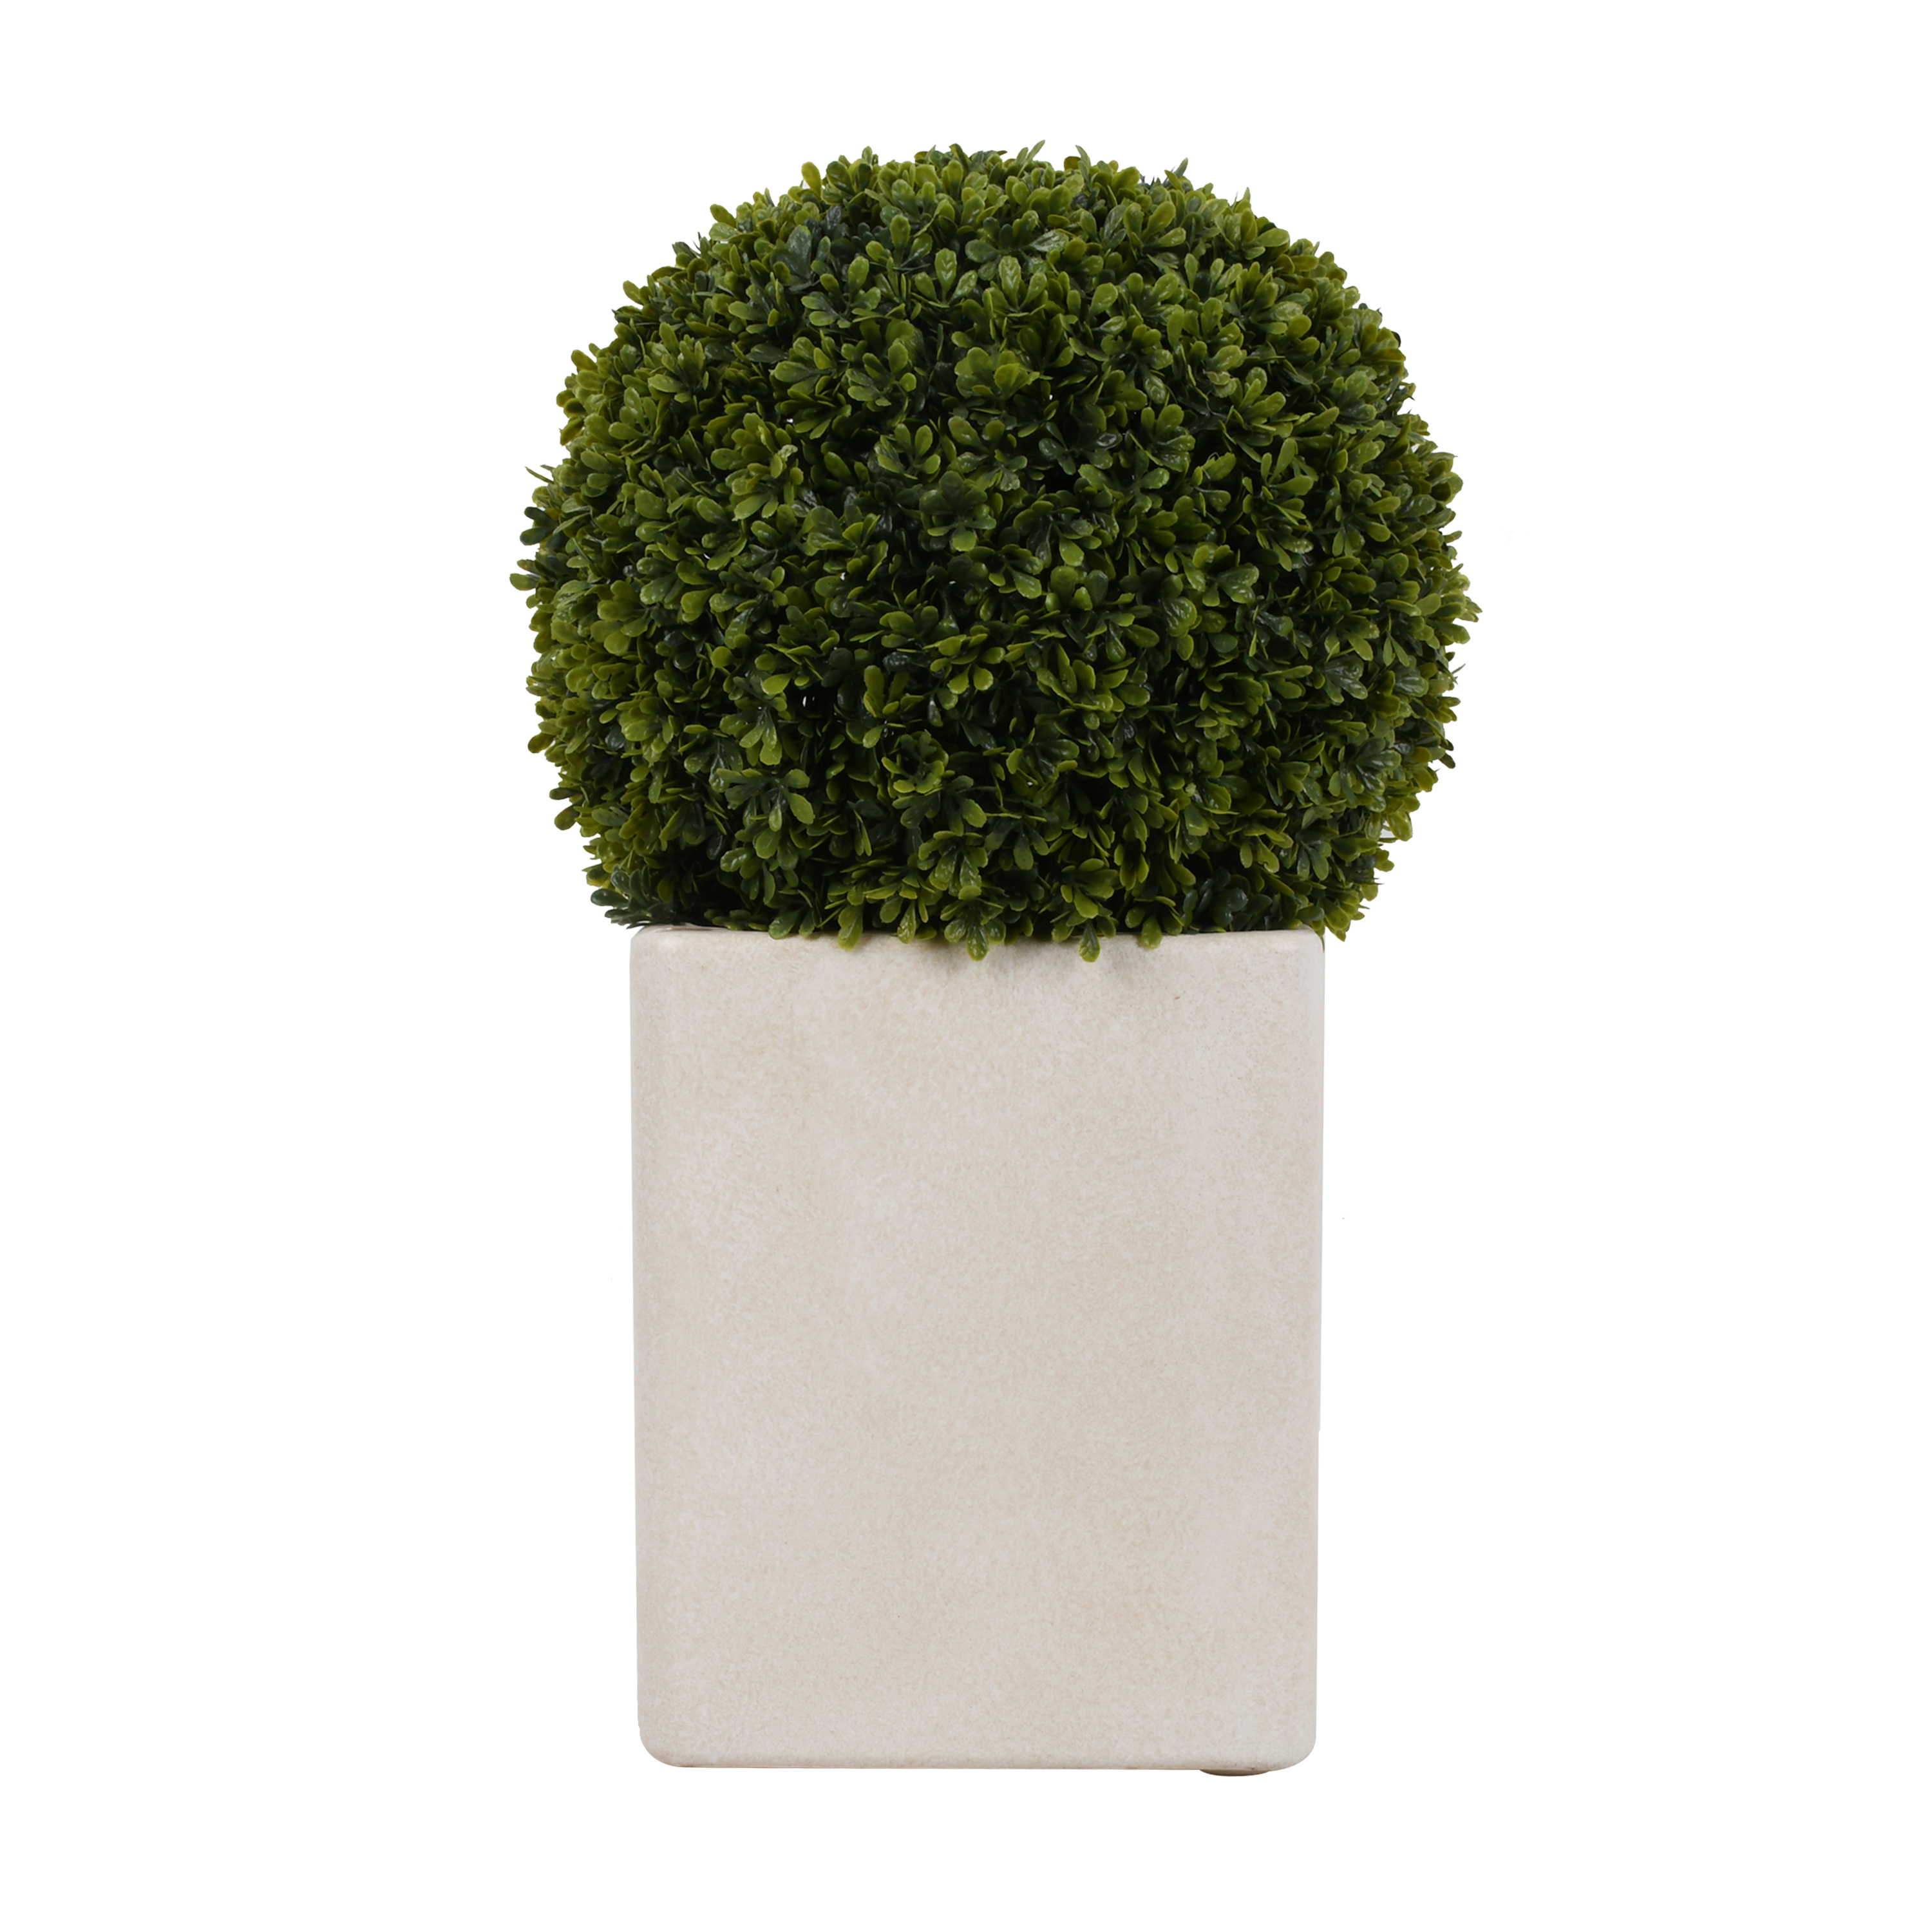 Better Homes & Gardens Outdoor Round 20"H Artificial Topiary Décor with Battery Powered Warm White LED Lights Eyebright - image 2 of 8